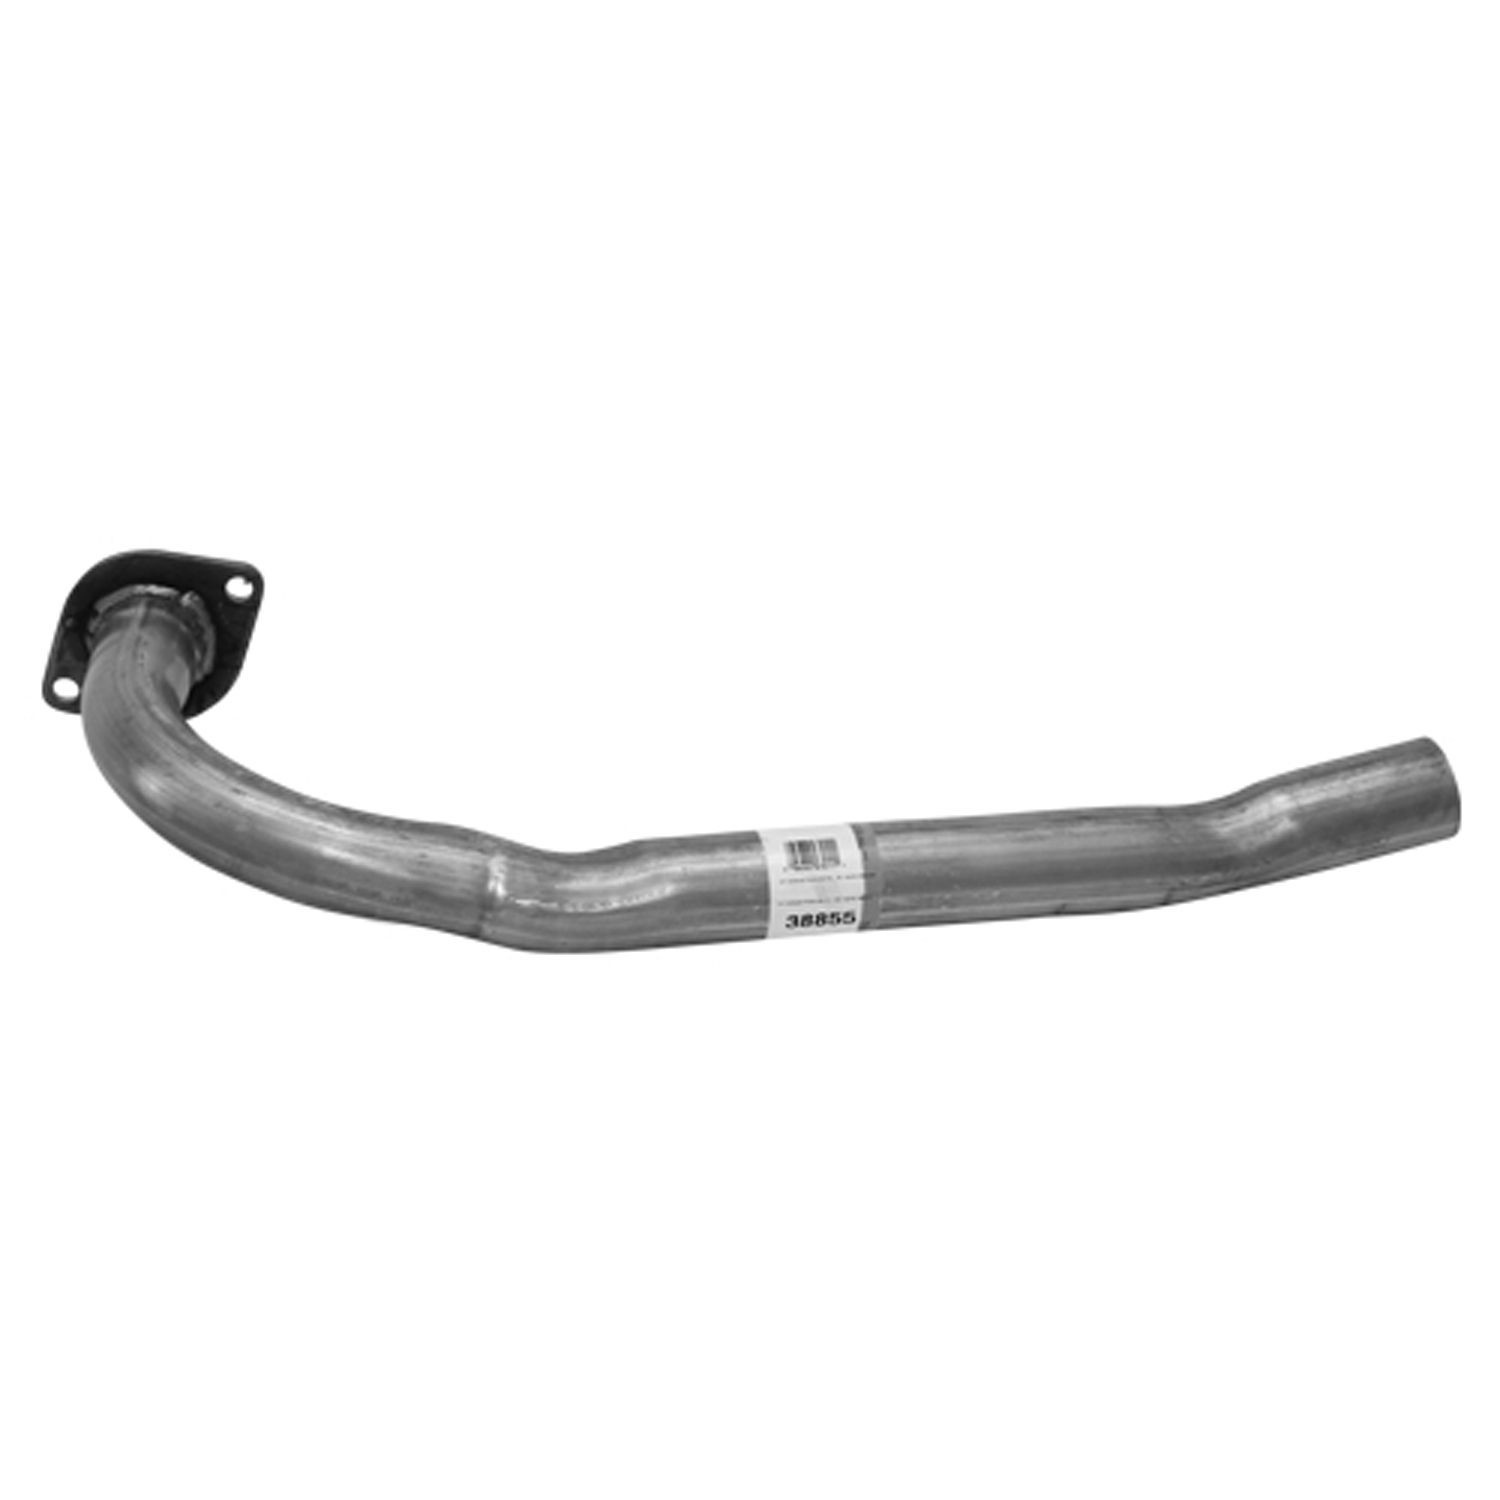 AP EXHAUST W/O FEDERAL CONVERTER - Exhaust Pipe - APK 38855